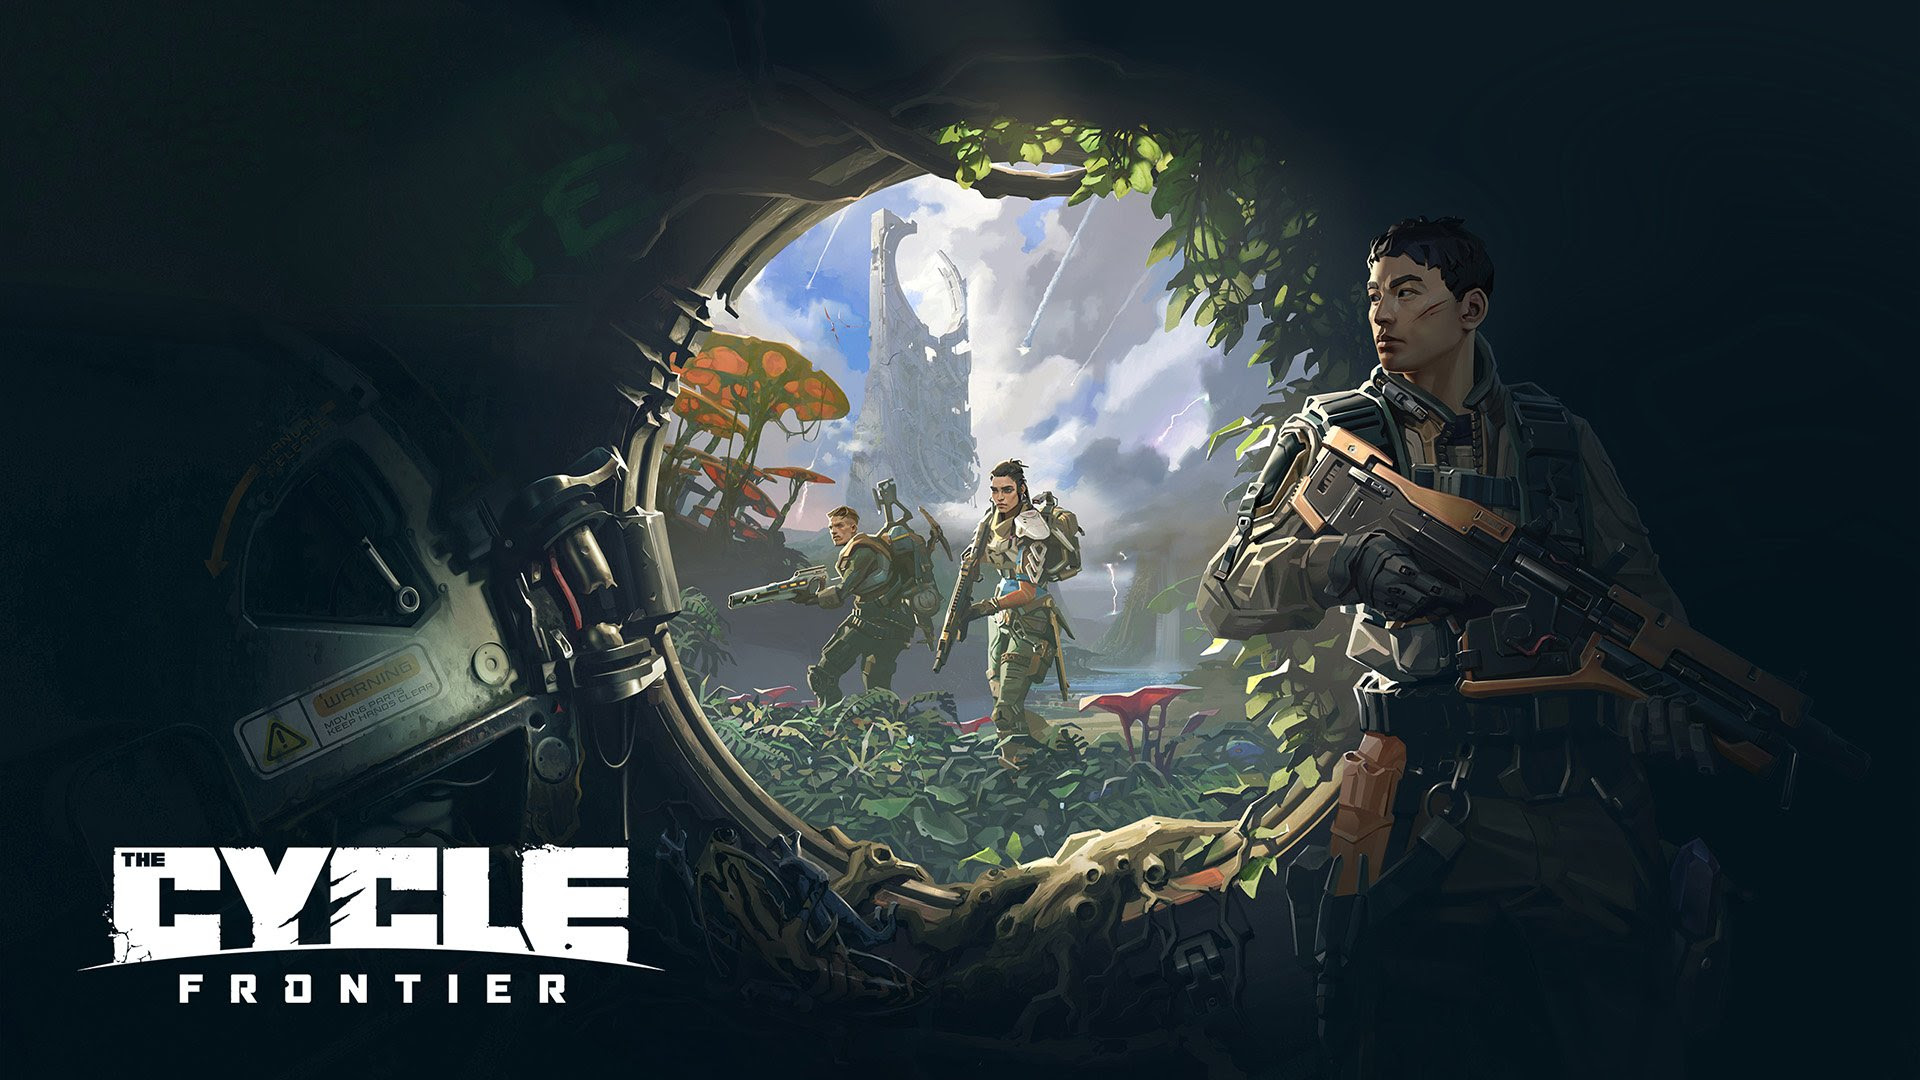 The Cycle: Frontier closed beta su Steam & Epic Game Store